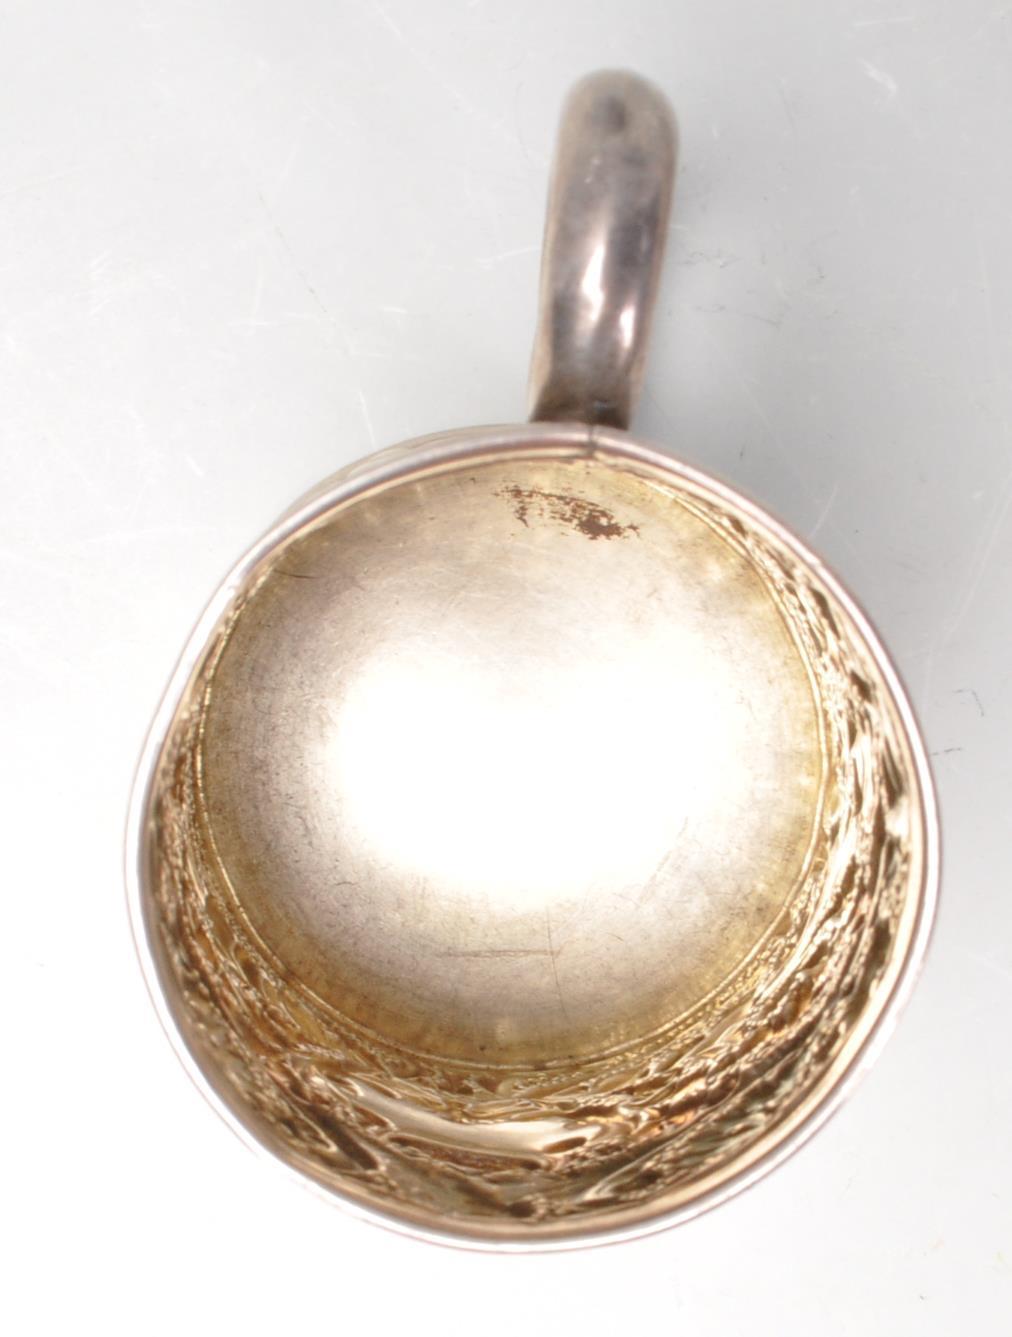 EDWARDIAN SILVER CHRISTENING CUP - Image 6 of 7